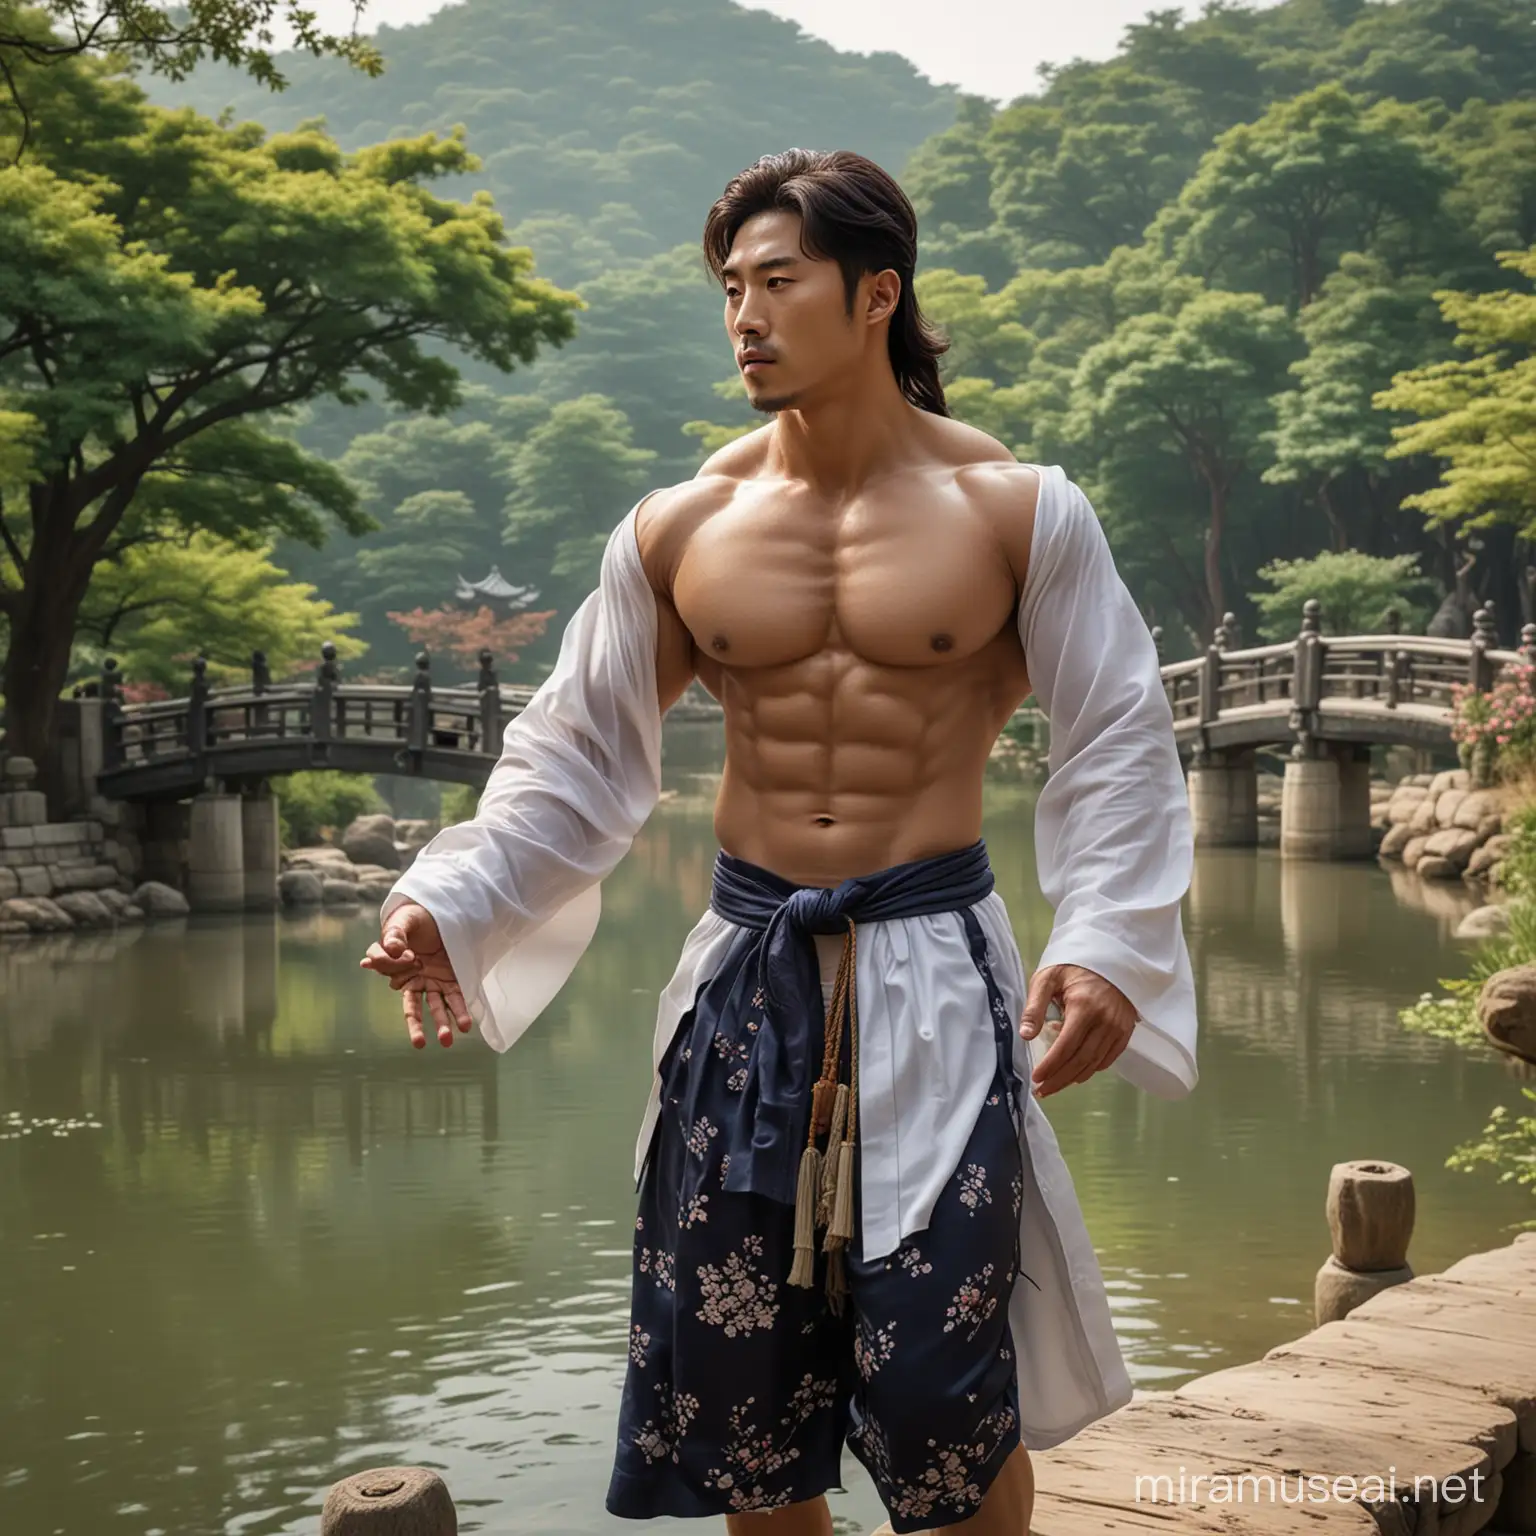 A hyper-realistic photo of a very attractive handsome Korean muscular bodybuilder with long flowing wavey hair dressed in traditional clothing with a bare torso showing his thick muscles, big biceps and massive chest, standing on a foot bridge over a river in a beautiful traditional Korean garden. 